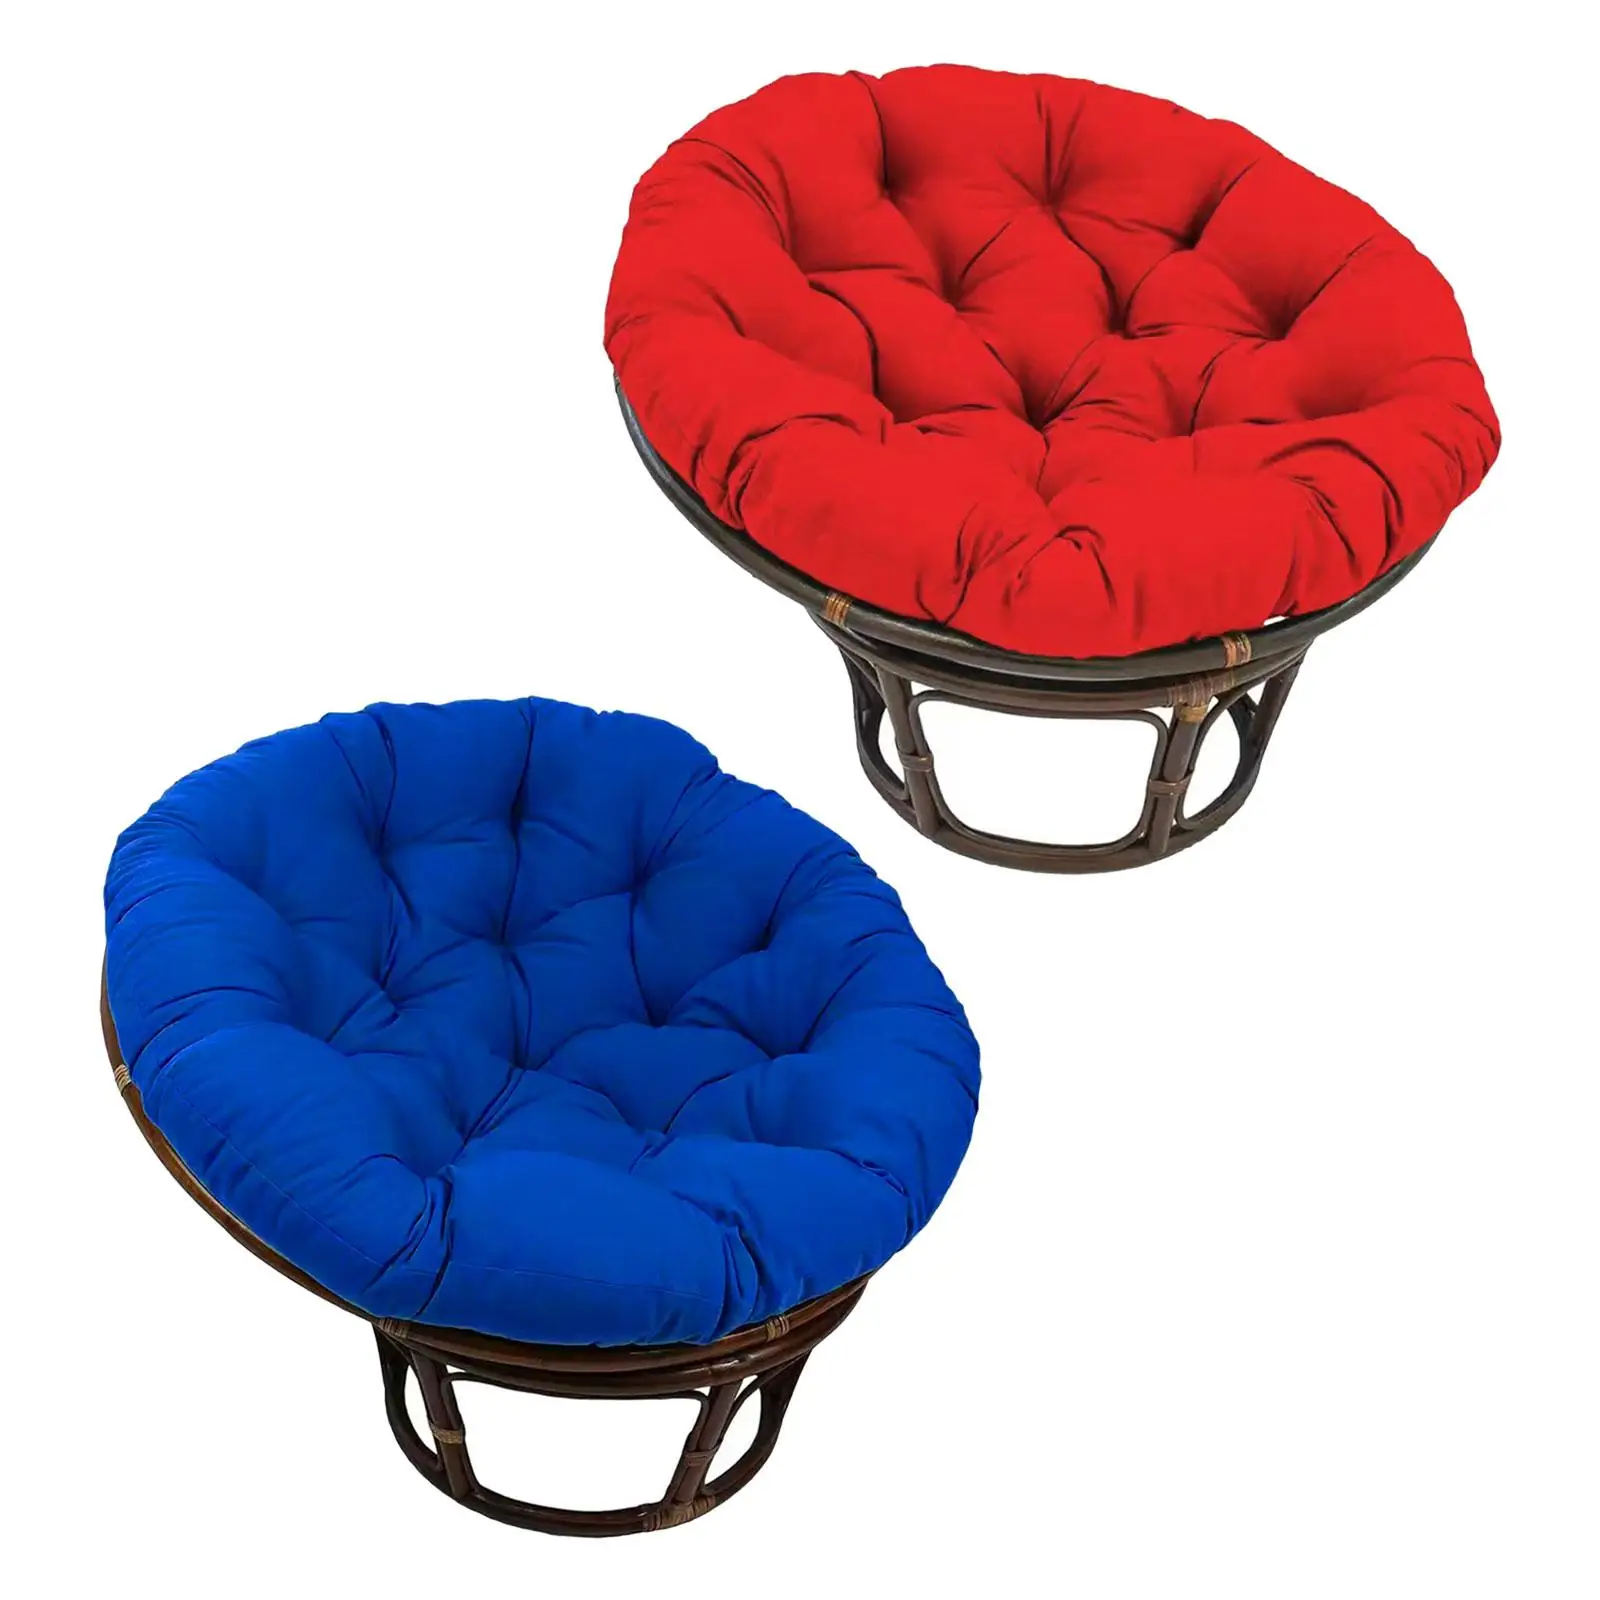 Patio Outdoor Hanging Basket Chair Cushions Egg Chair Swing Chair Pads